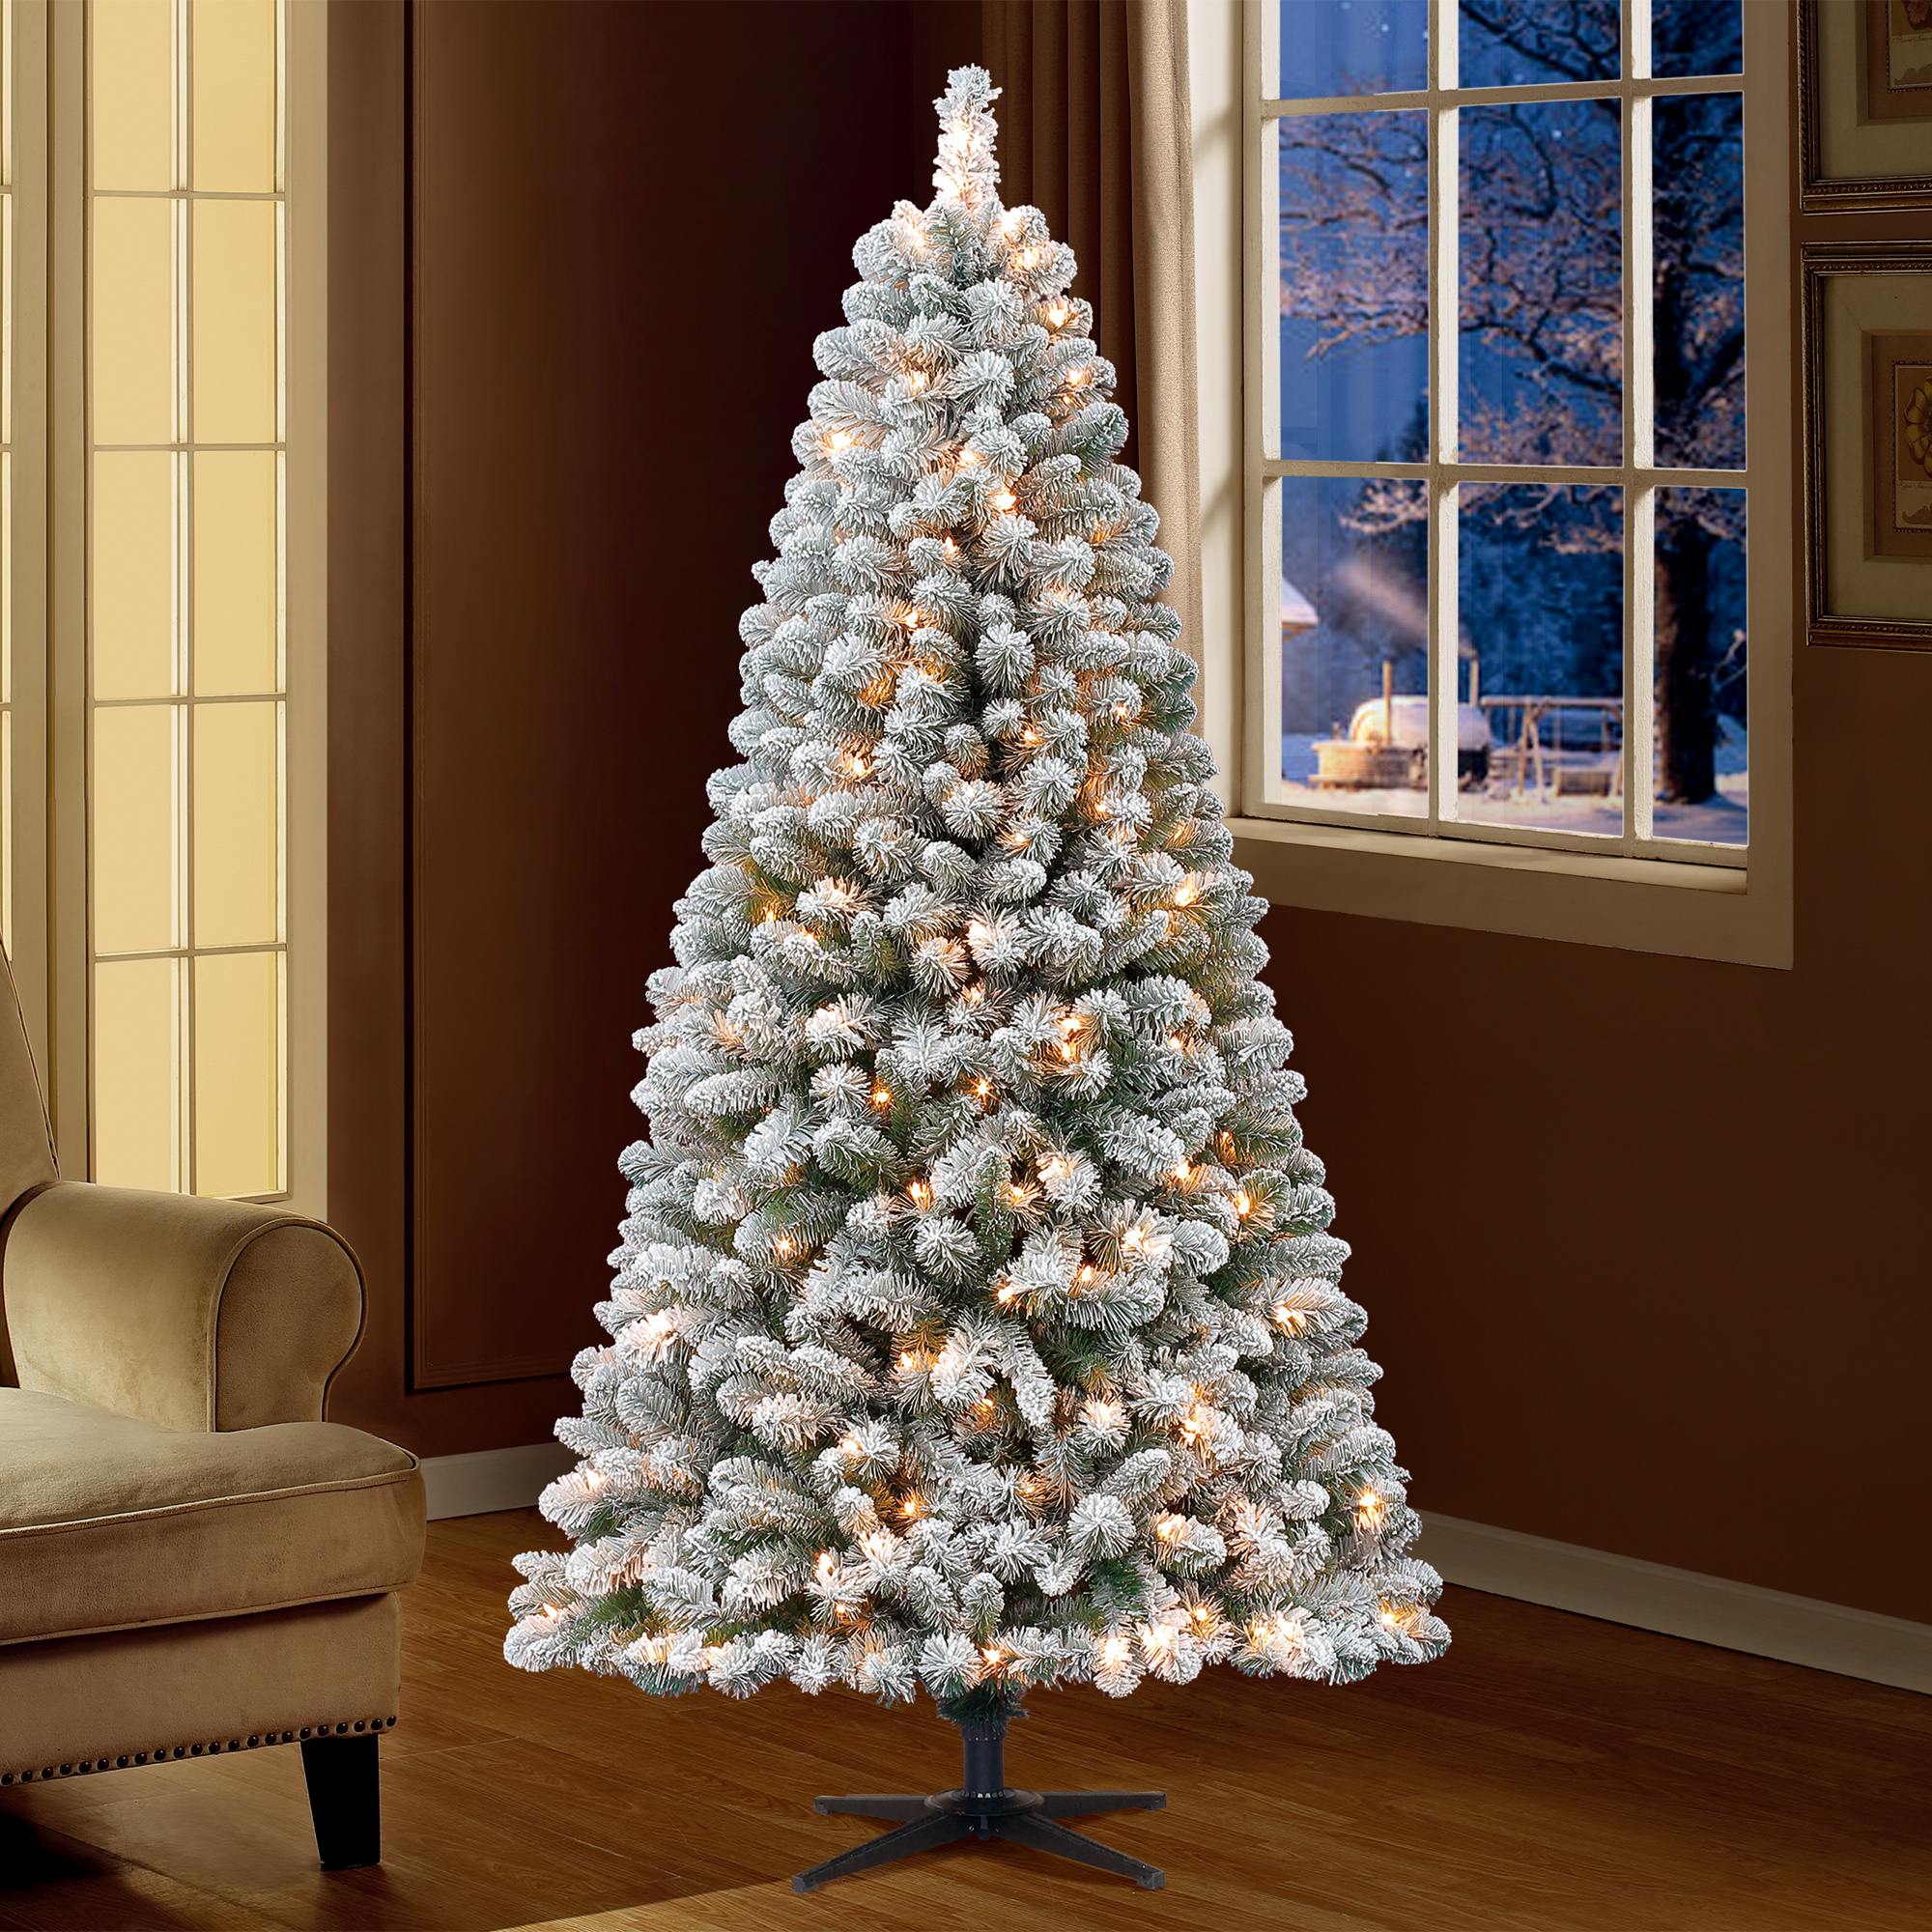 Holiday Time Flocked Pine Christmas Tree 6.5 ft, White on Green - image 4 of 4